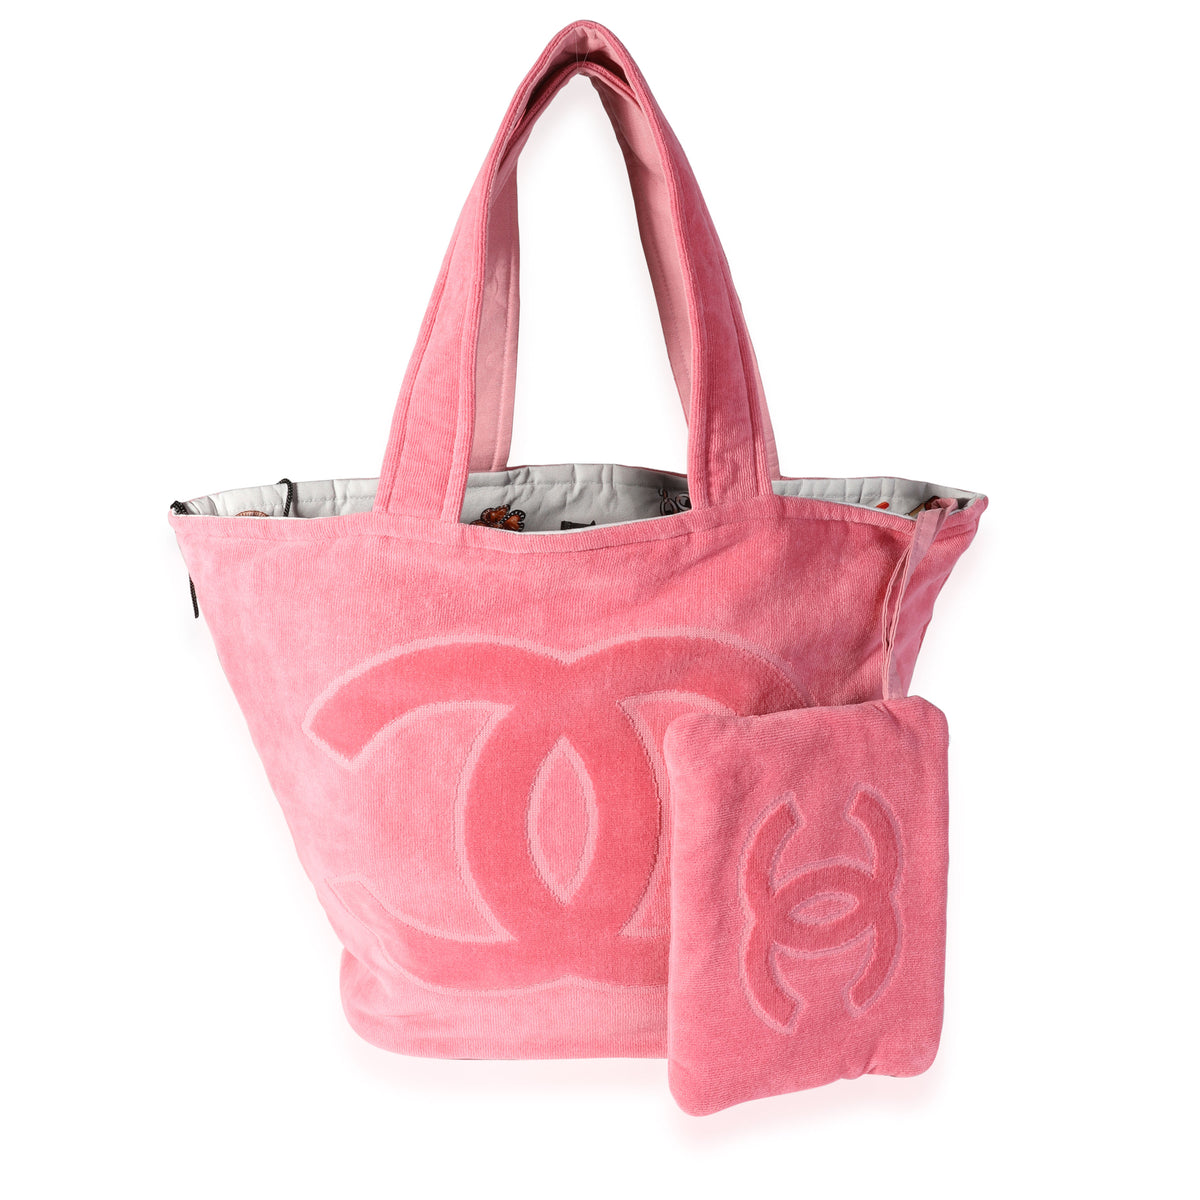 CHANEL Terry Cotton CC Beach Tote Towel Set Pink 1196410